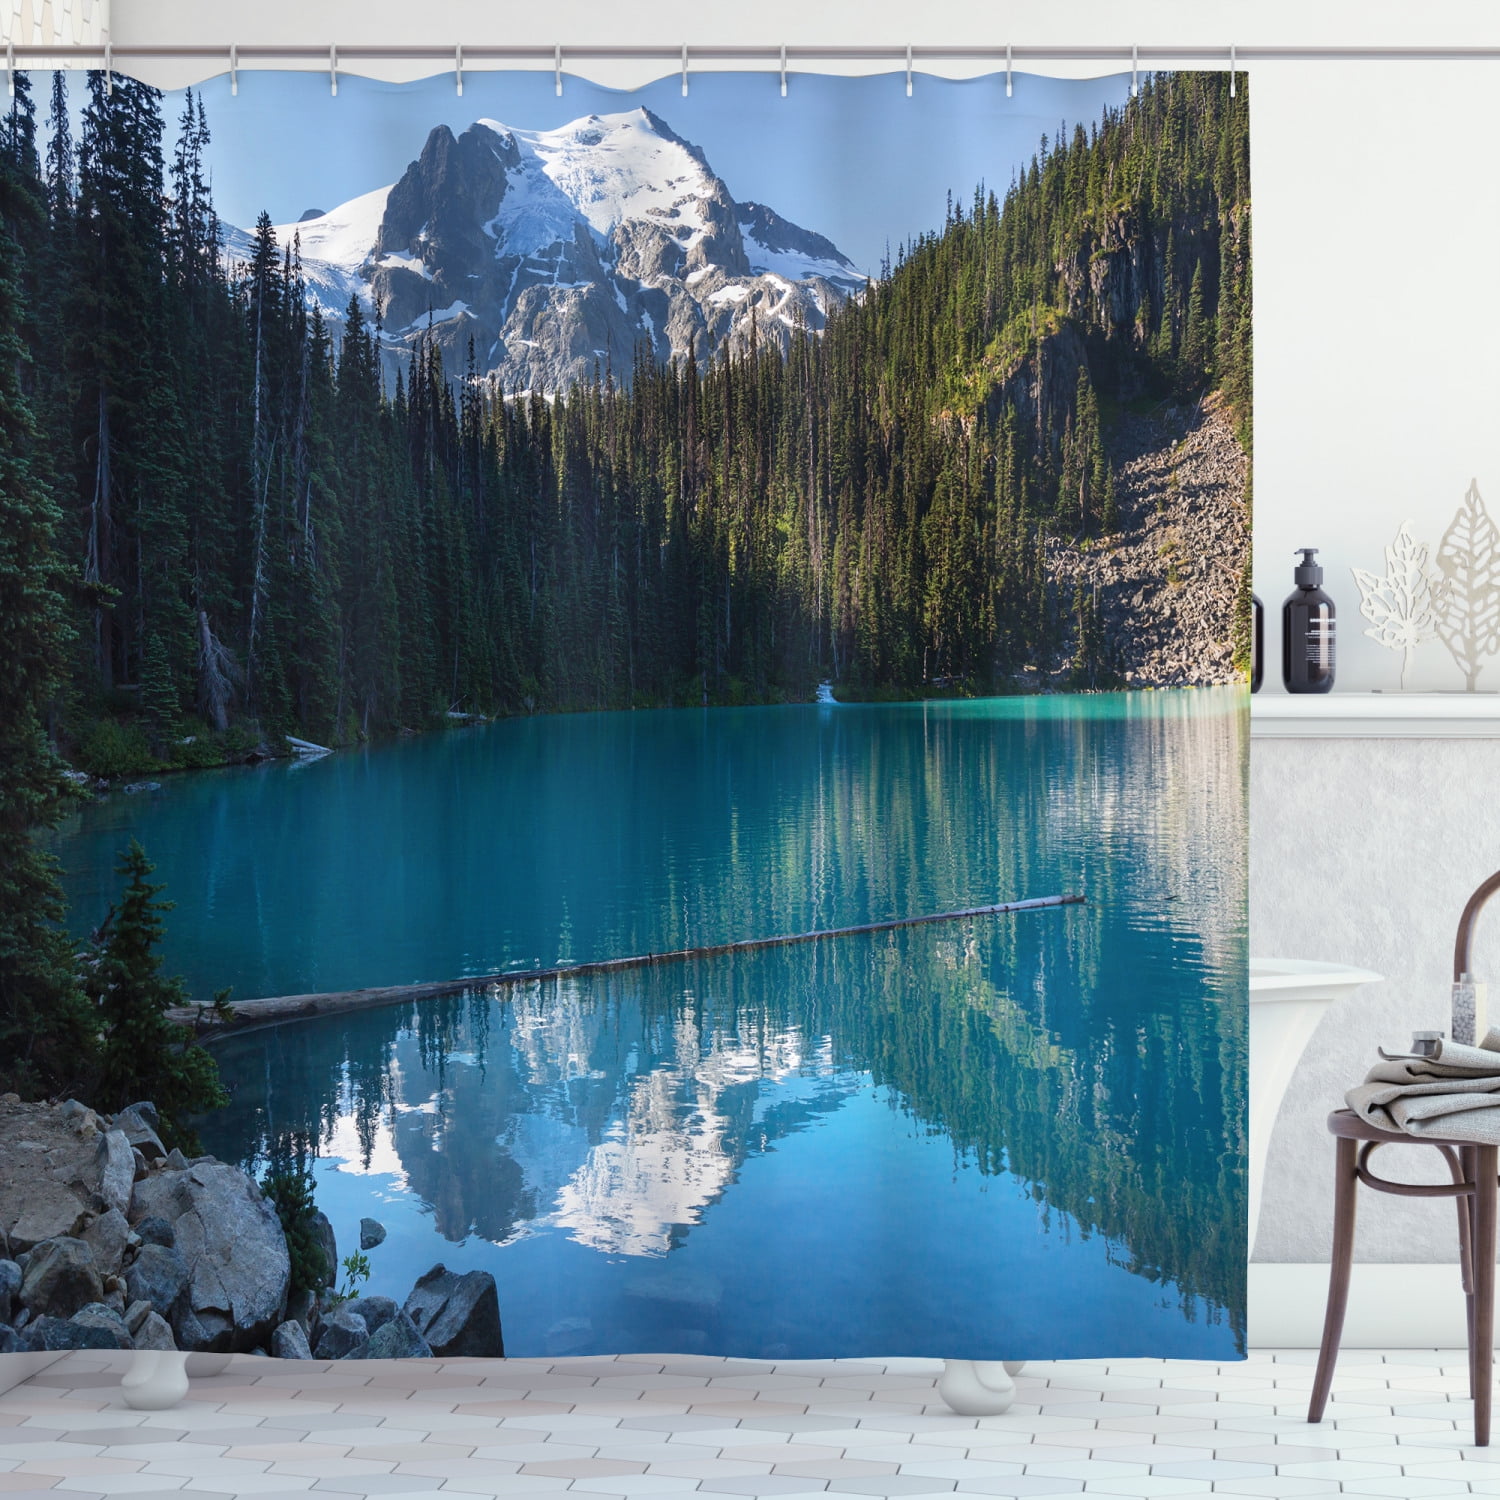 Landscape Shower Curtain, Lake in Northern Canada with Slim Trees and Snowy  Frozen Mountain Novelty, Fabric Bathroom Set with Hooks, 69W X 70L Inches,  Blue White Green, by Ambesonne 